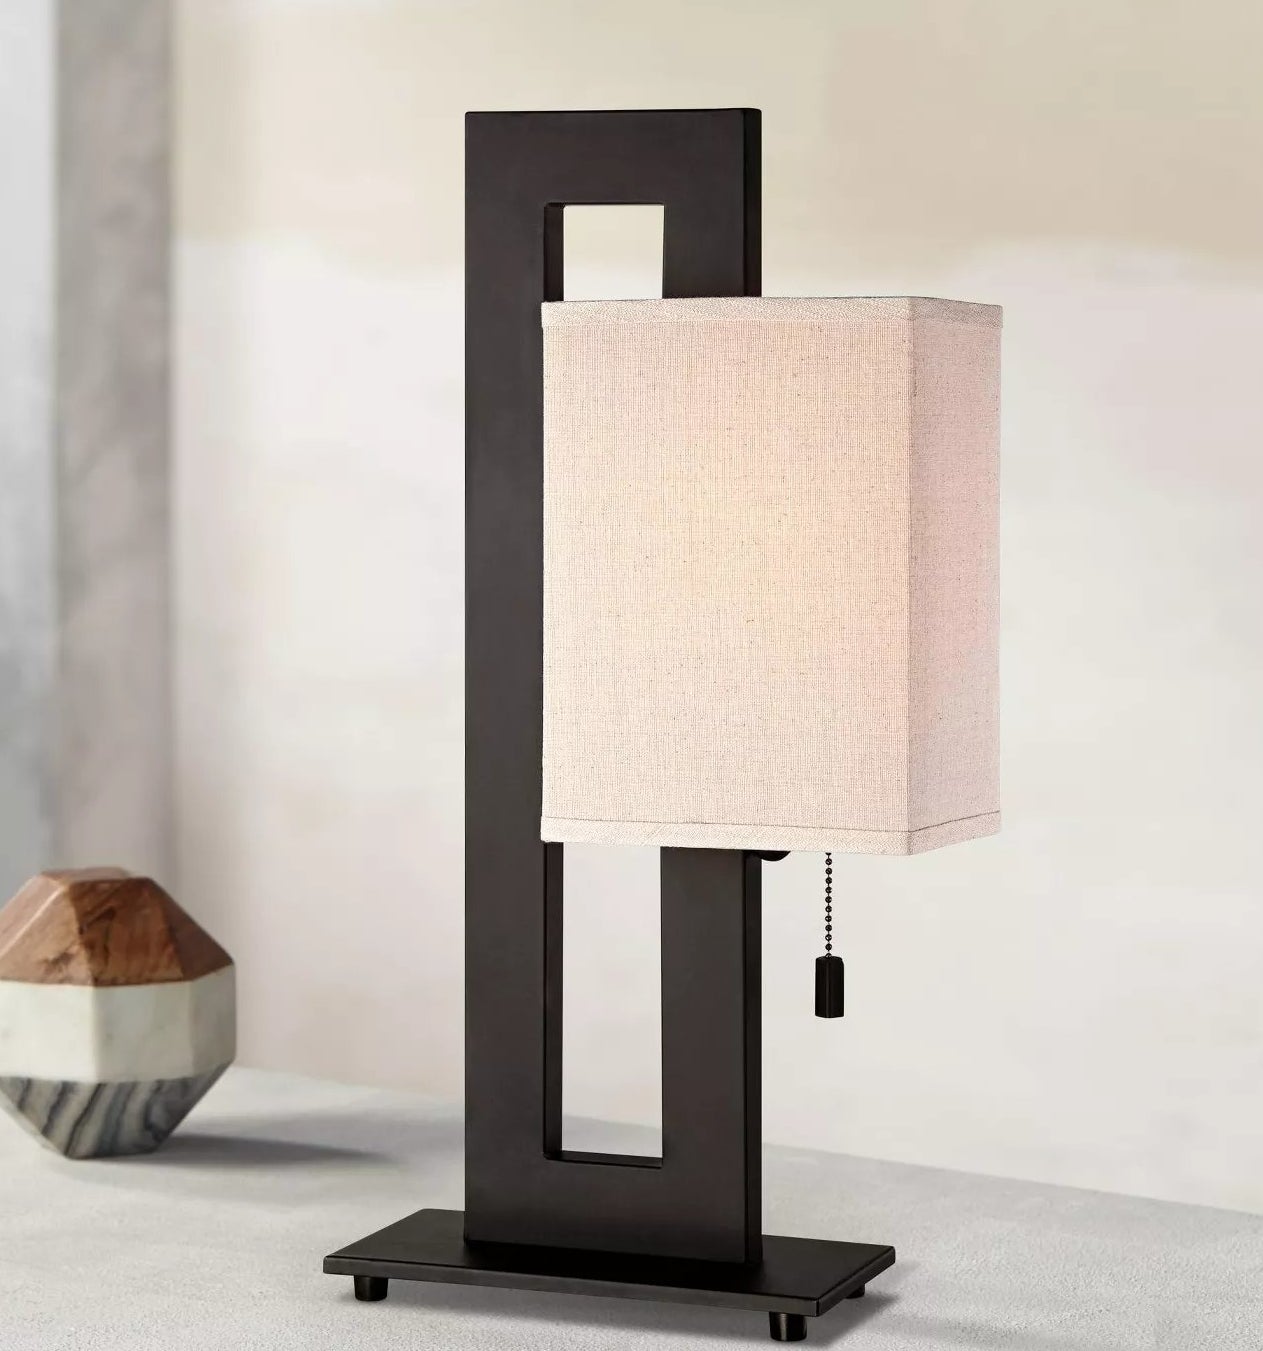 The black, asymmetrical table lamp with a beige shade